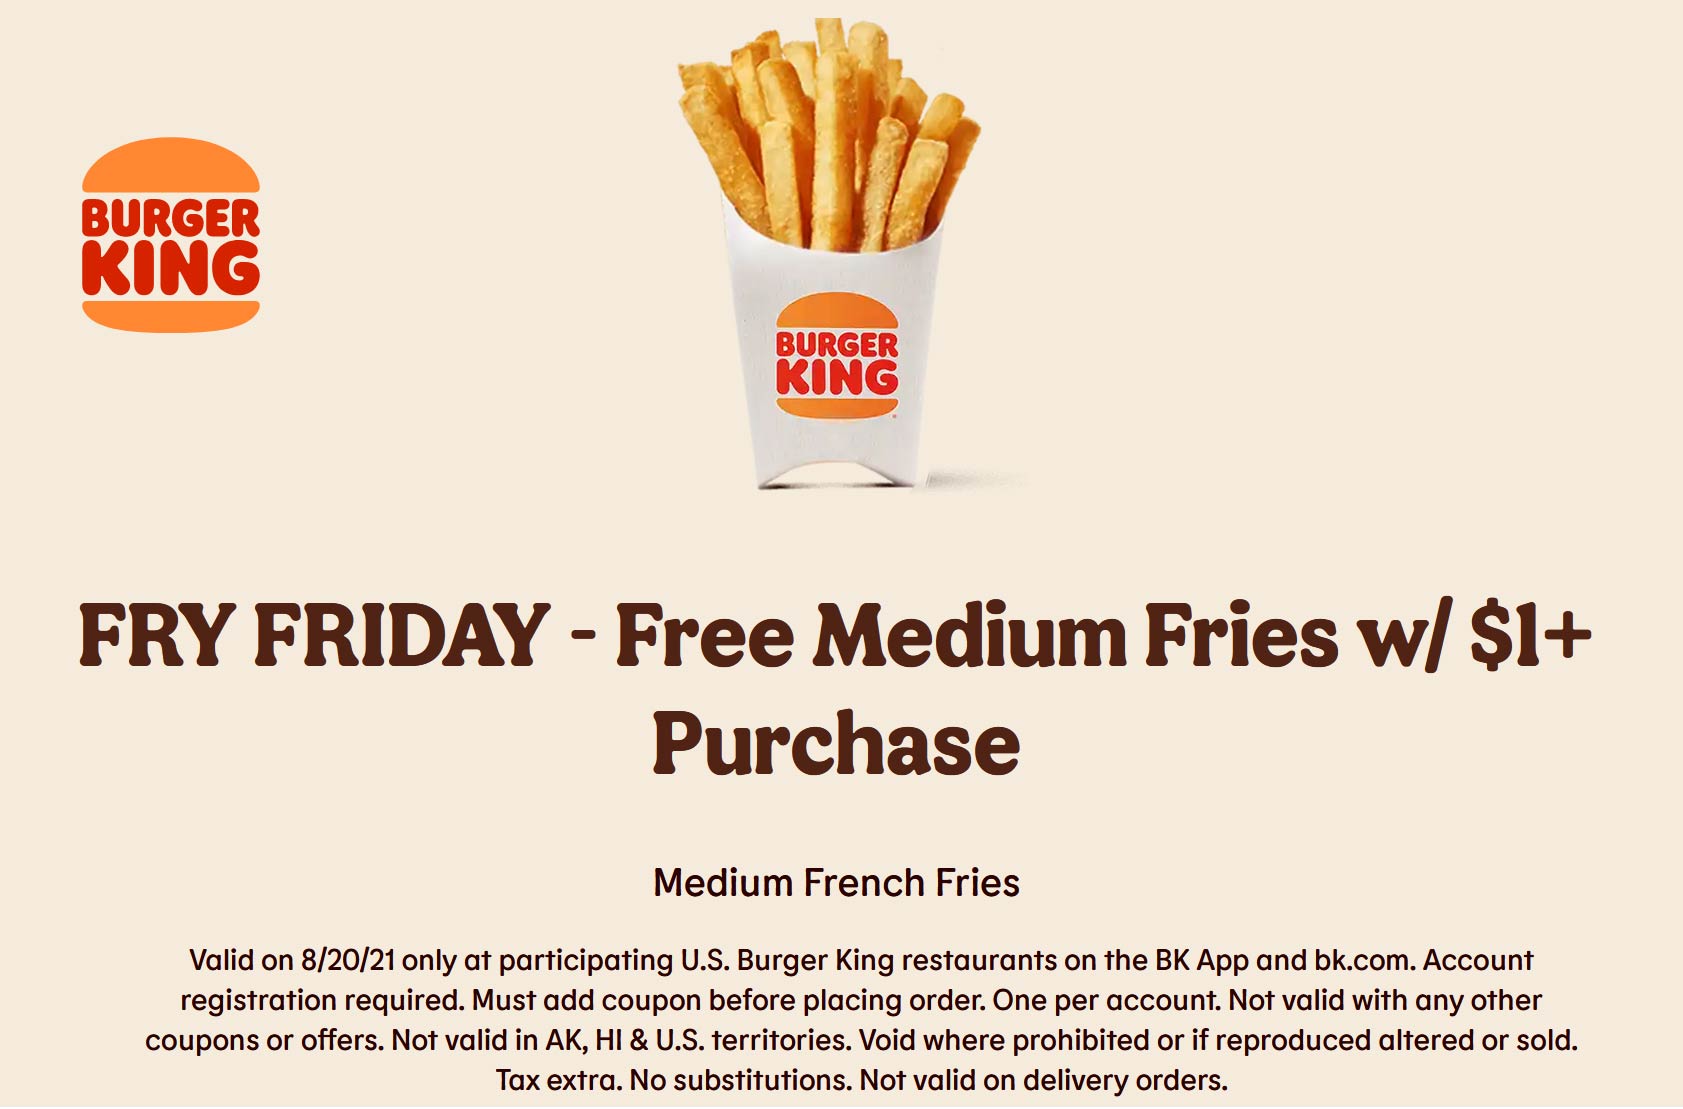 Burger King restaurants Coupon  Free french fries with $1 spent today at Burger King #burgerking 